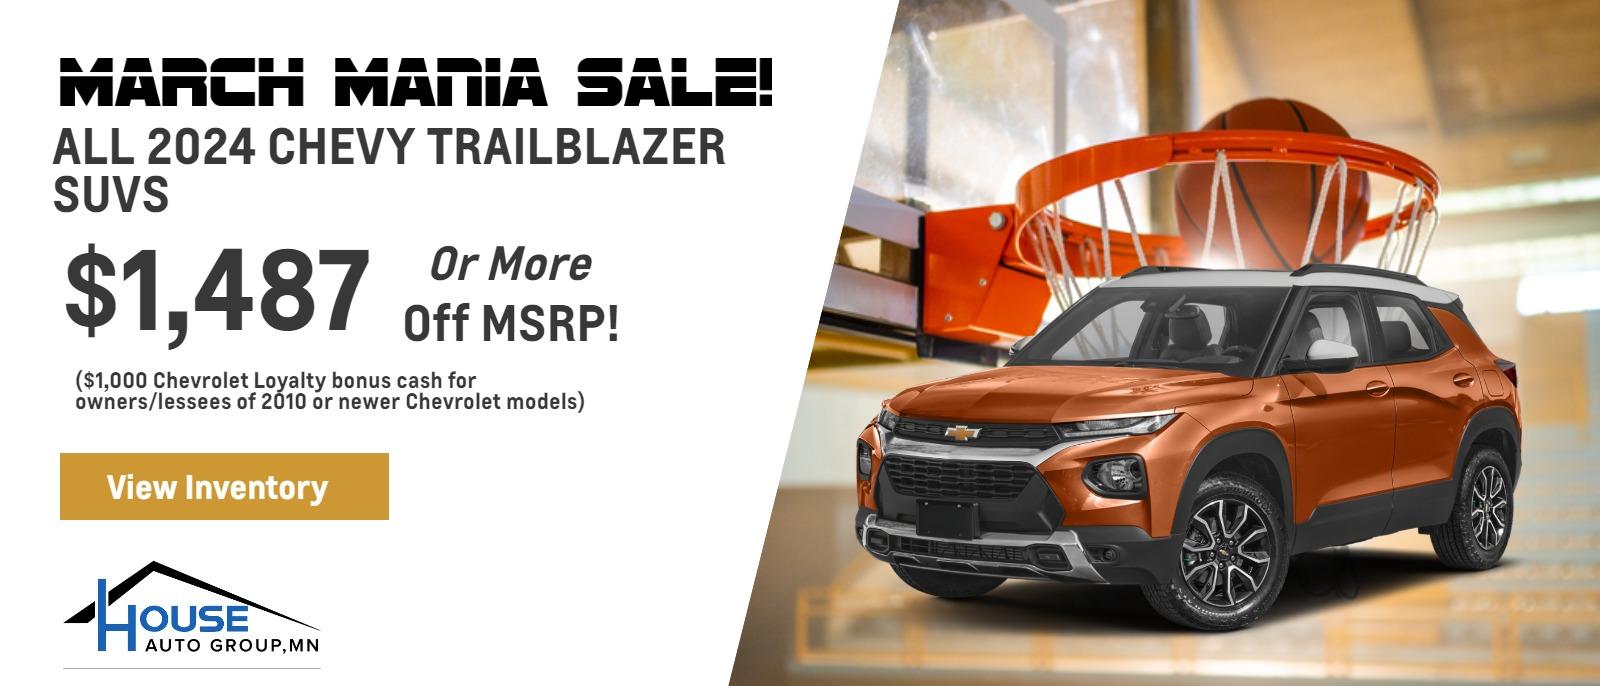 ALL 2023 Chevy Trailblazer SUVs - $1,487 or more Off MSRP! ($1,000 Chevrolet Loyalty bonus cash for owners/lessees of 2010 or newer Chevrolet models)